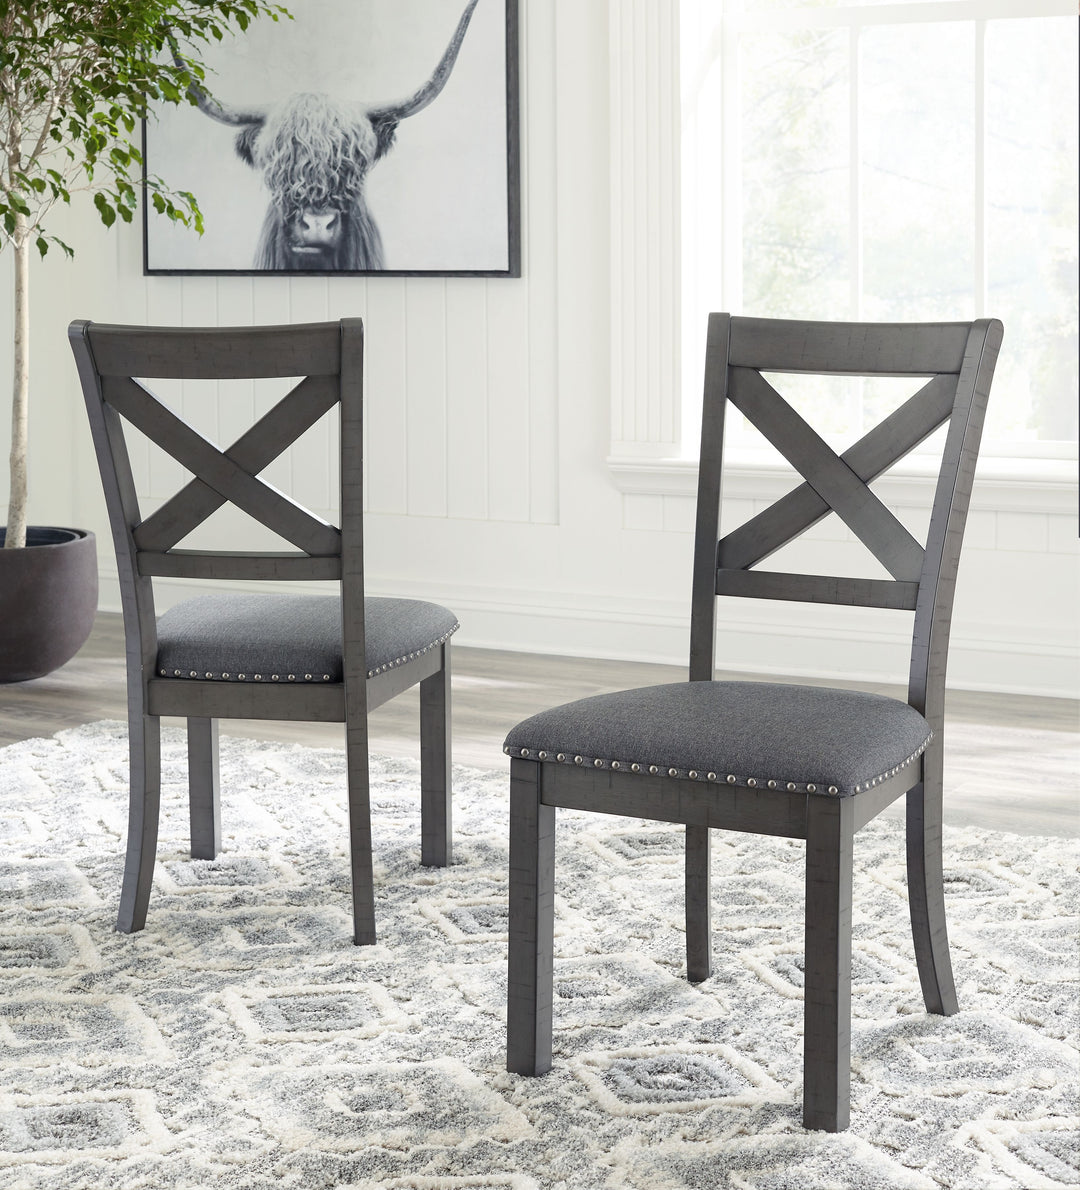 Ashely Furniture Myshanna - Dining Uph Side Chair (Set of 2)